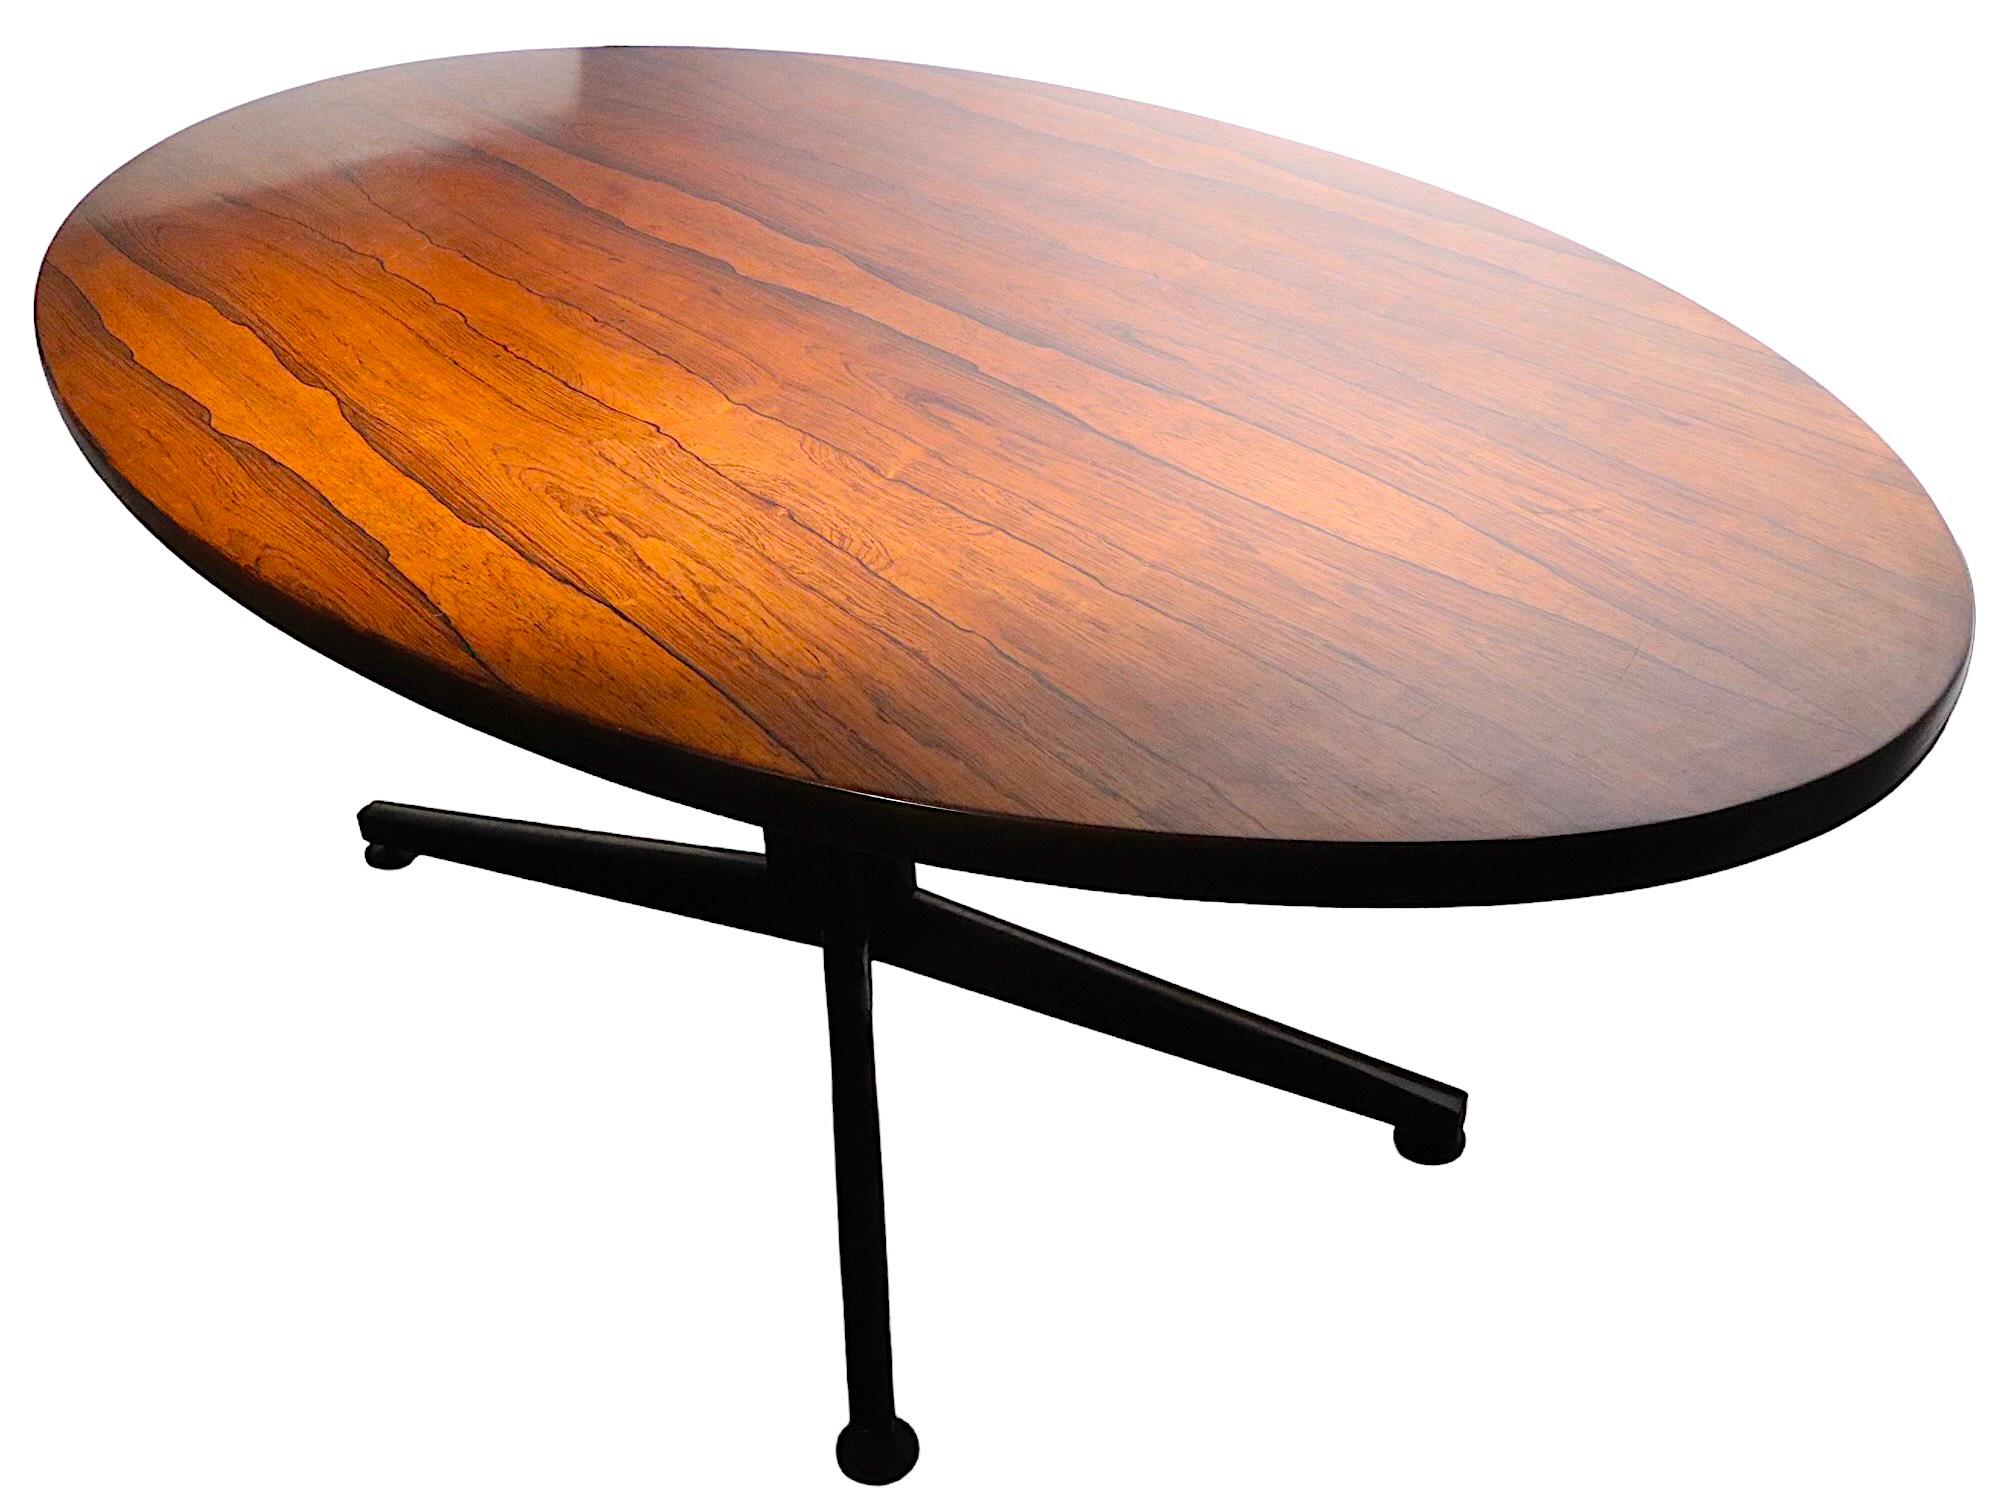 Dunbar Wormley Dining Table in Rosewood Model 936 C 1950/1960's For Sale 9